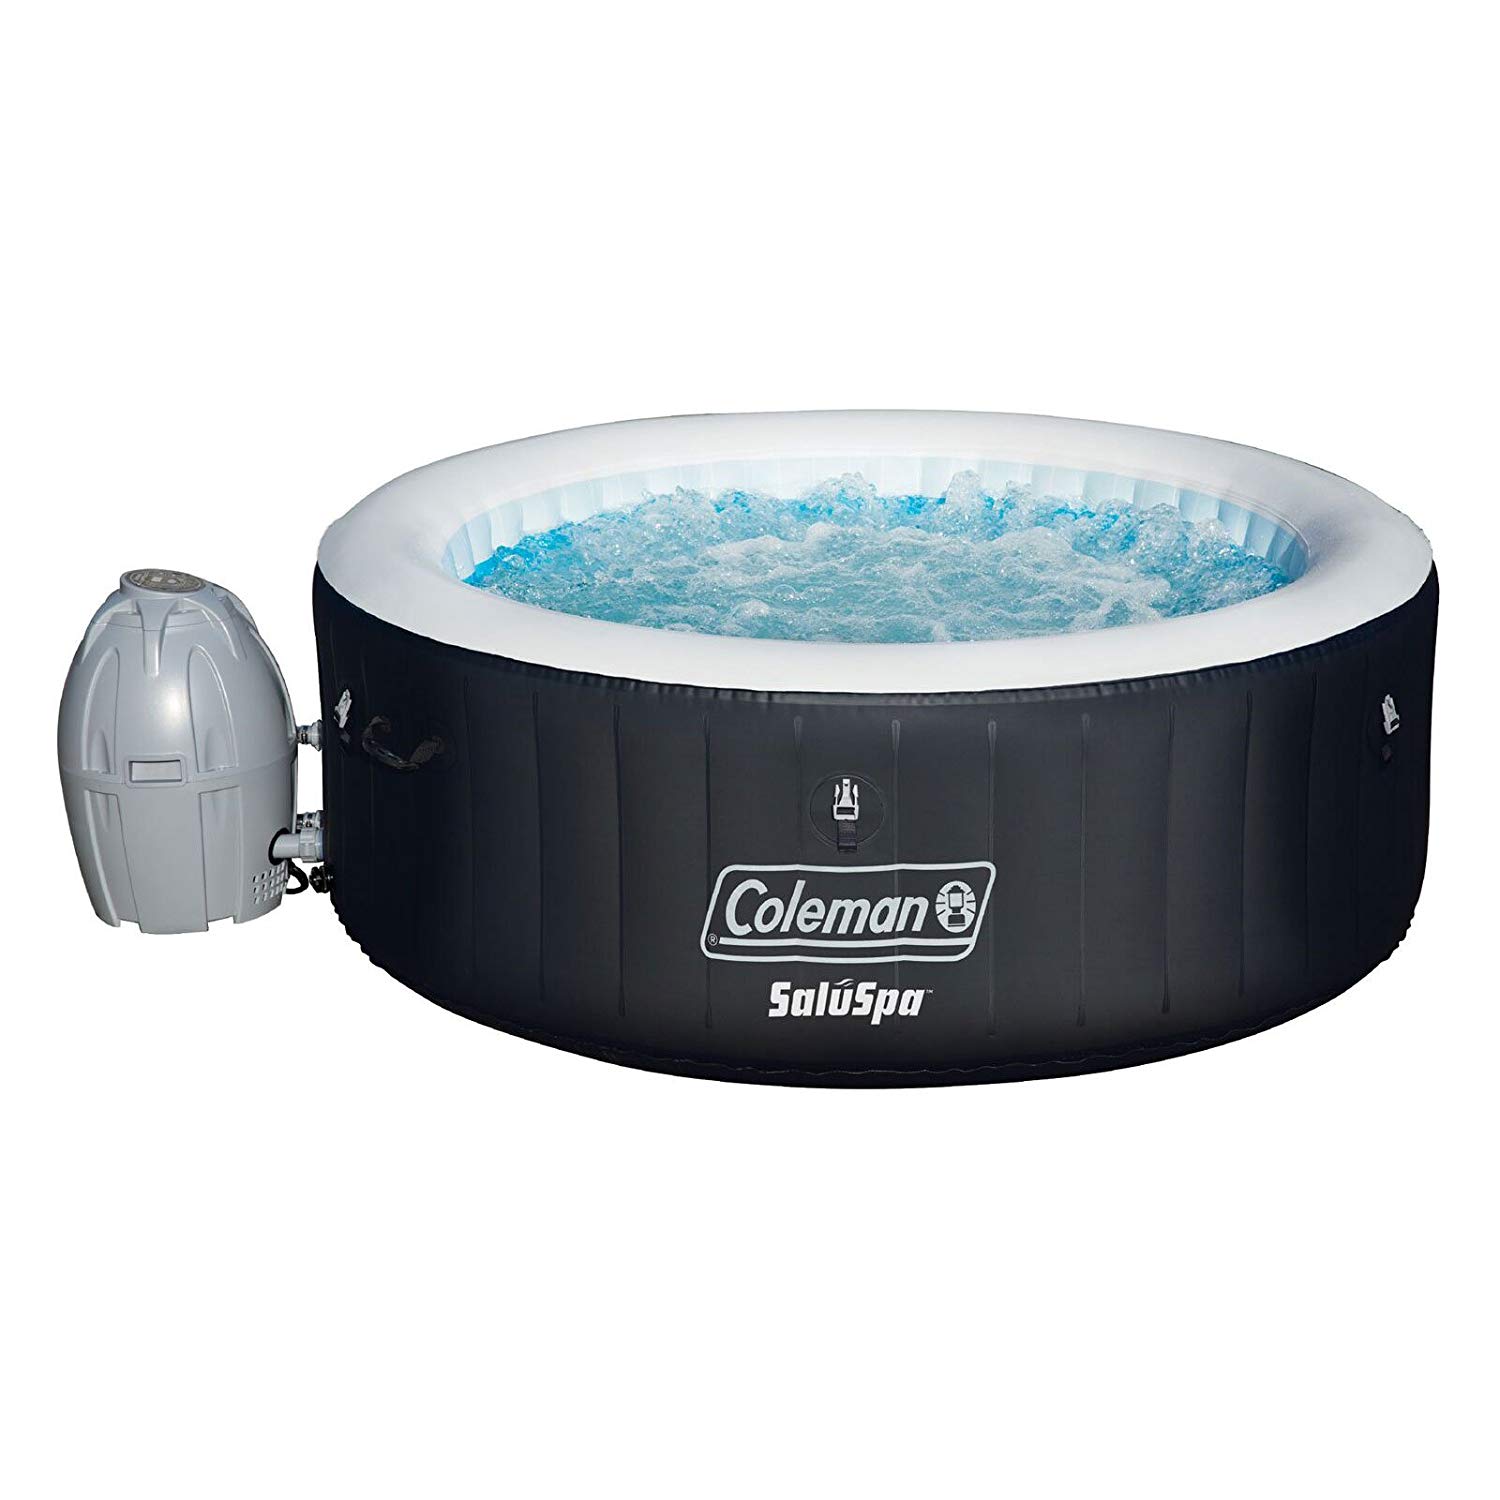 Coleman 71 X 26 inches portable inflatable spa 4-person hot Tub, black,13804